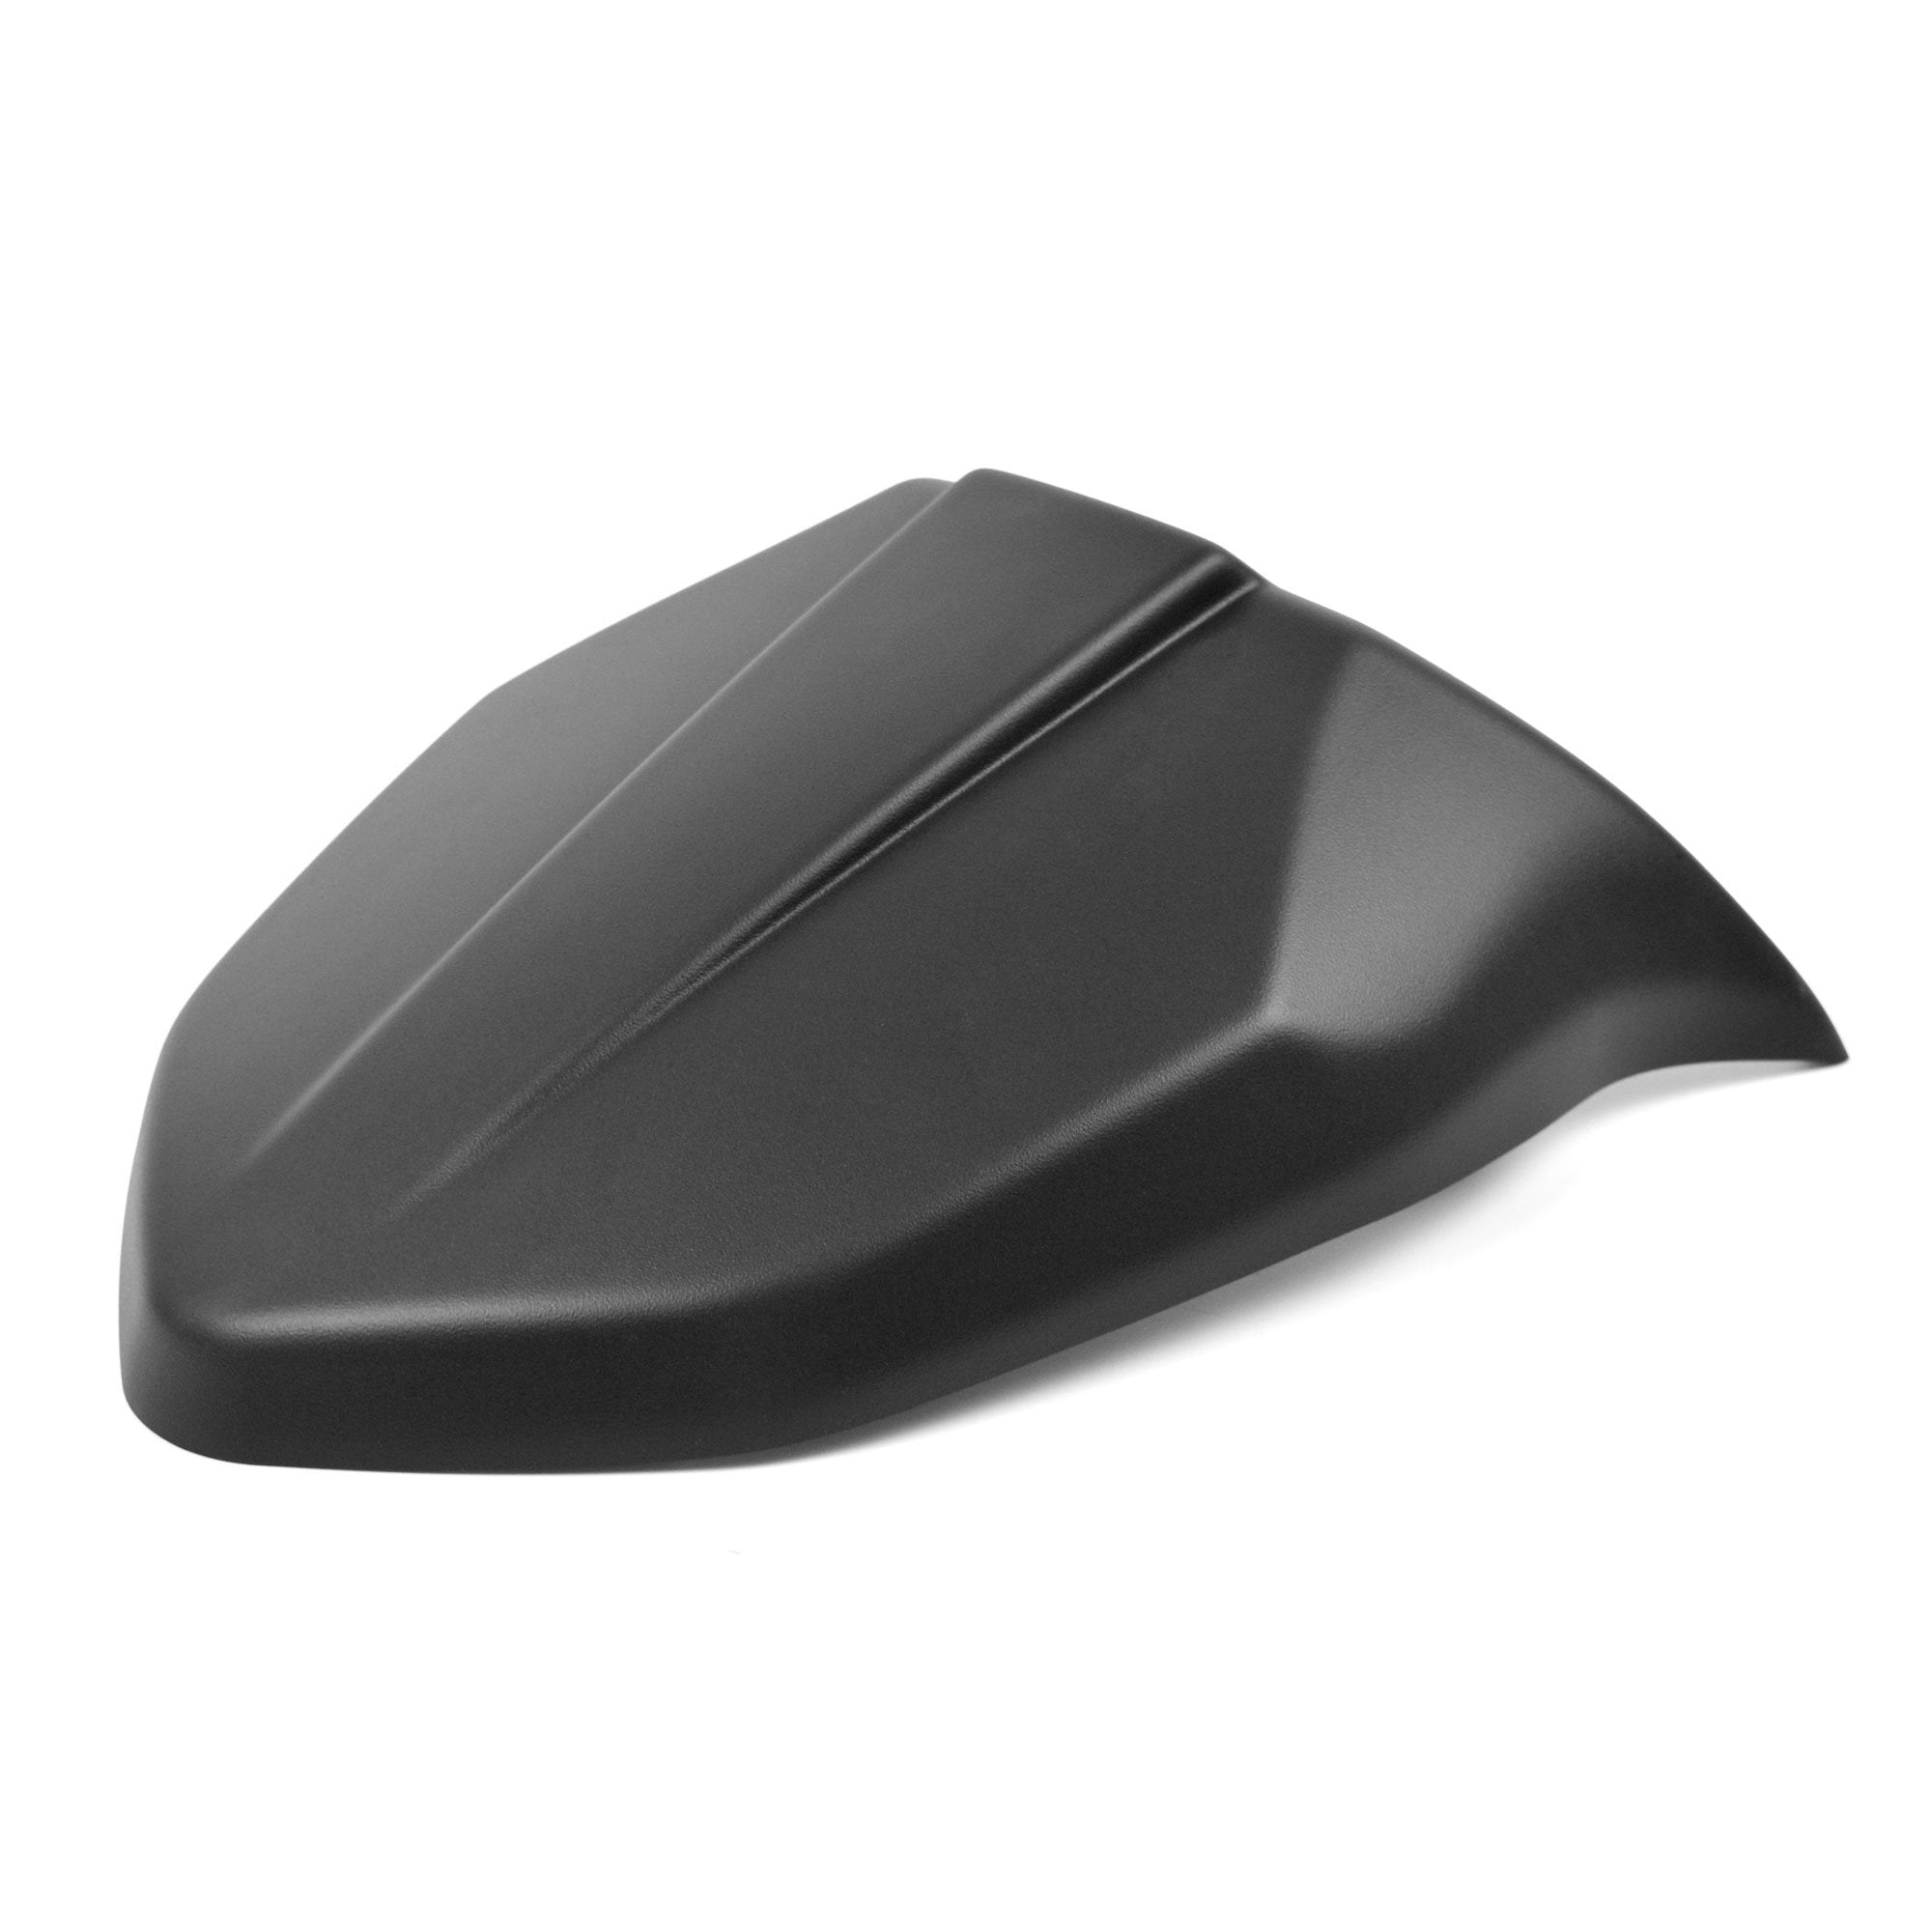 Pyramid Seat Cowl | Matte Black | BMW F900 R 2020>Current-24905M-Seat Cowls-Pyramid Motorcycle Accessories